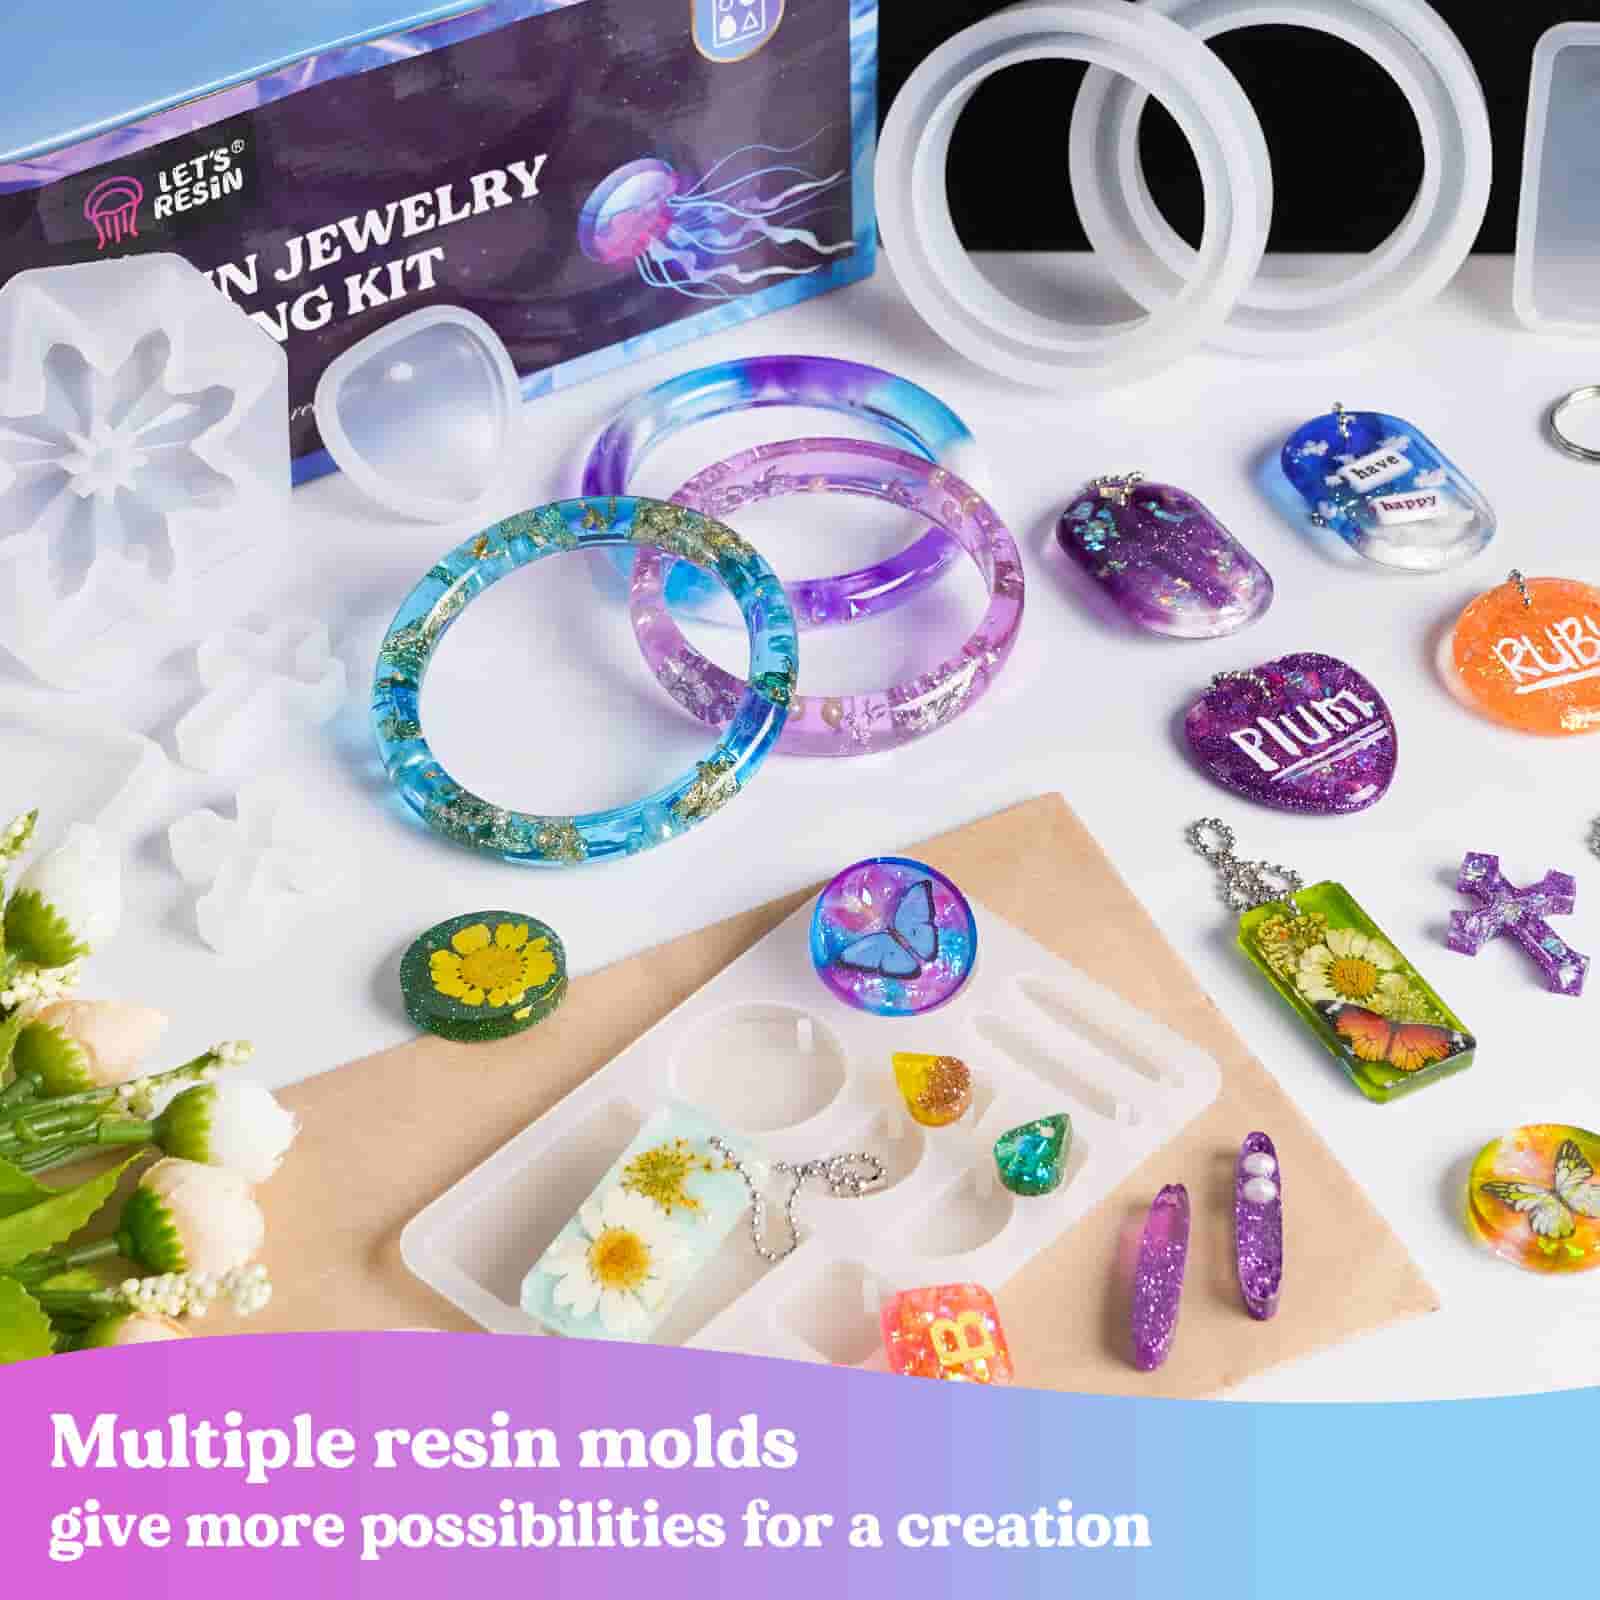 Craft It Up Epoxy Resin Kit for Beginners - Jewerly Making Kit for Kids and  Adults - All in One Craft Set with Molds, Charms, Dyes, Dry Flowers 